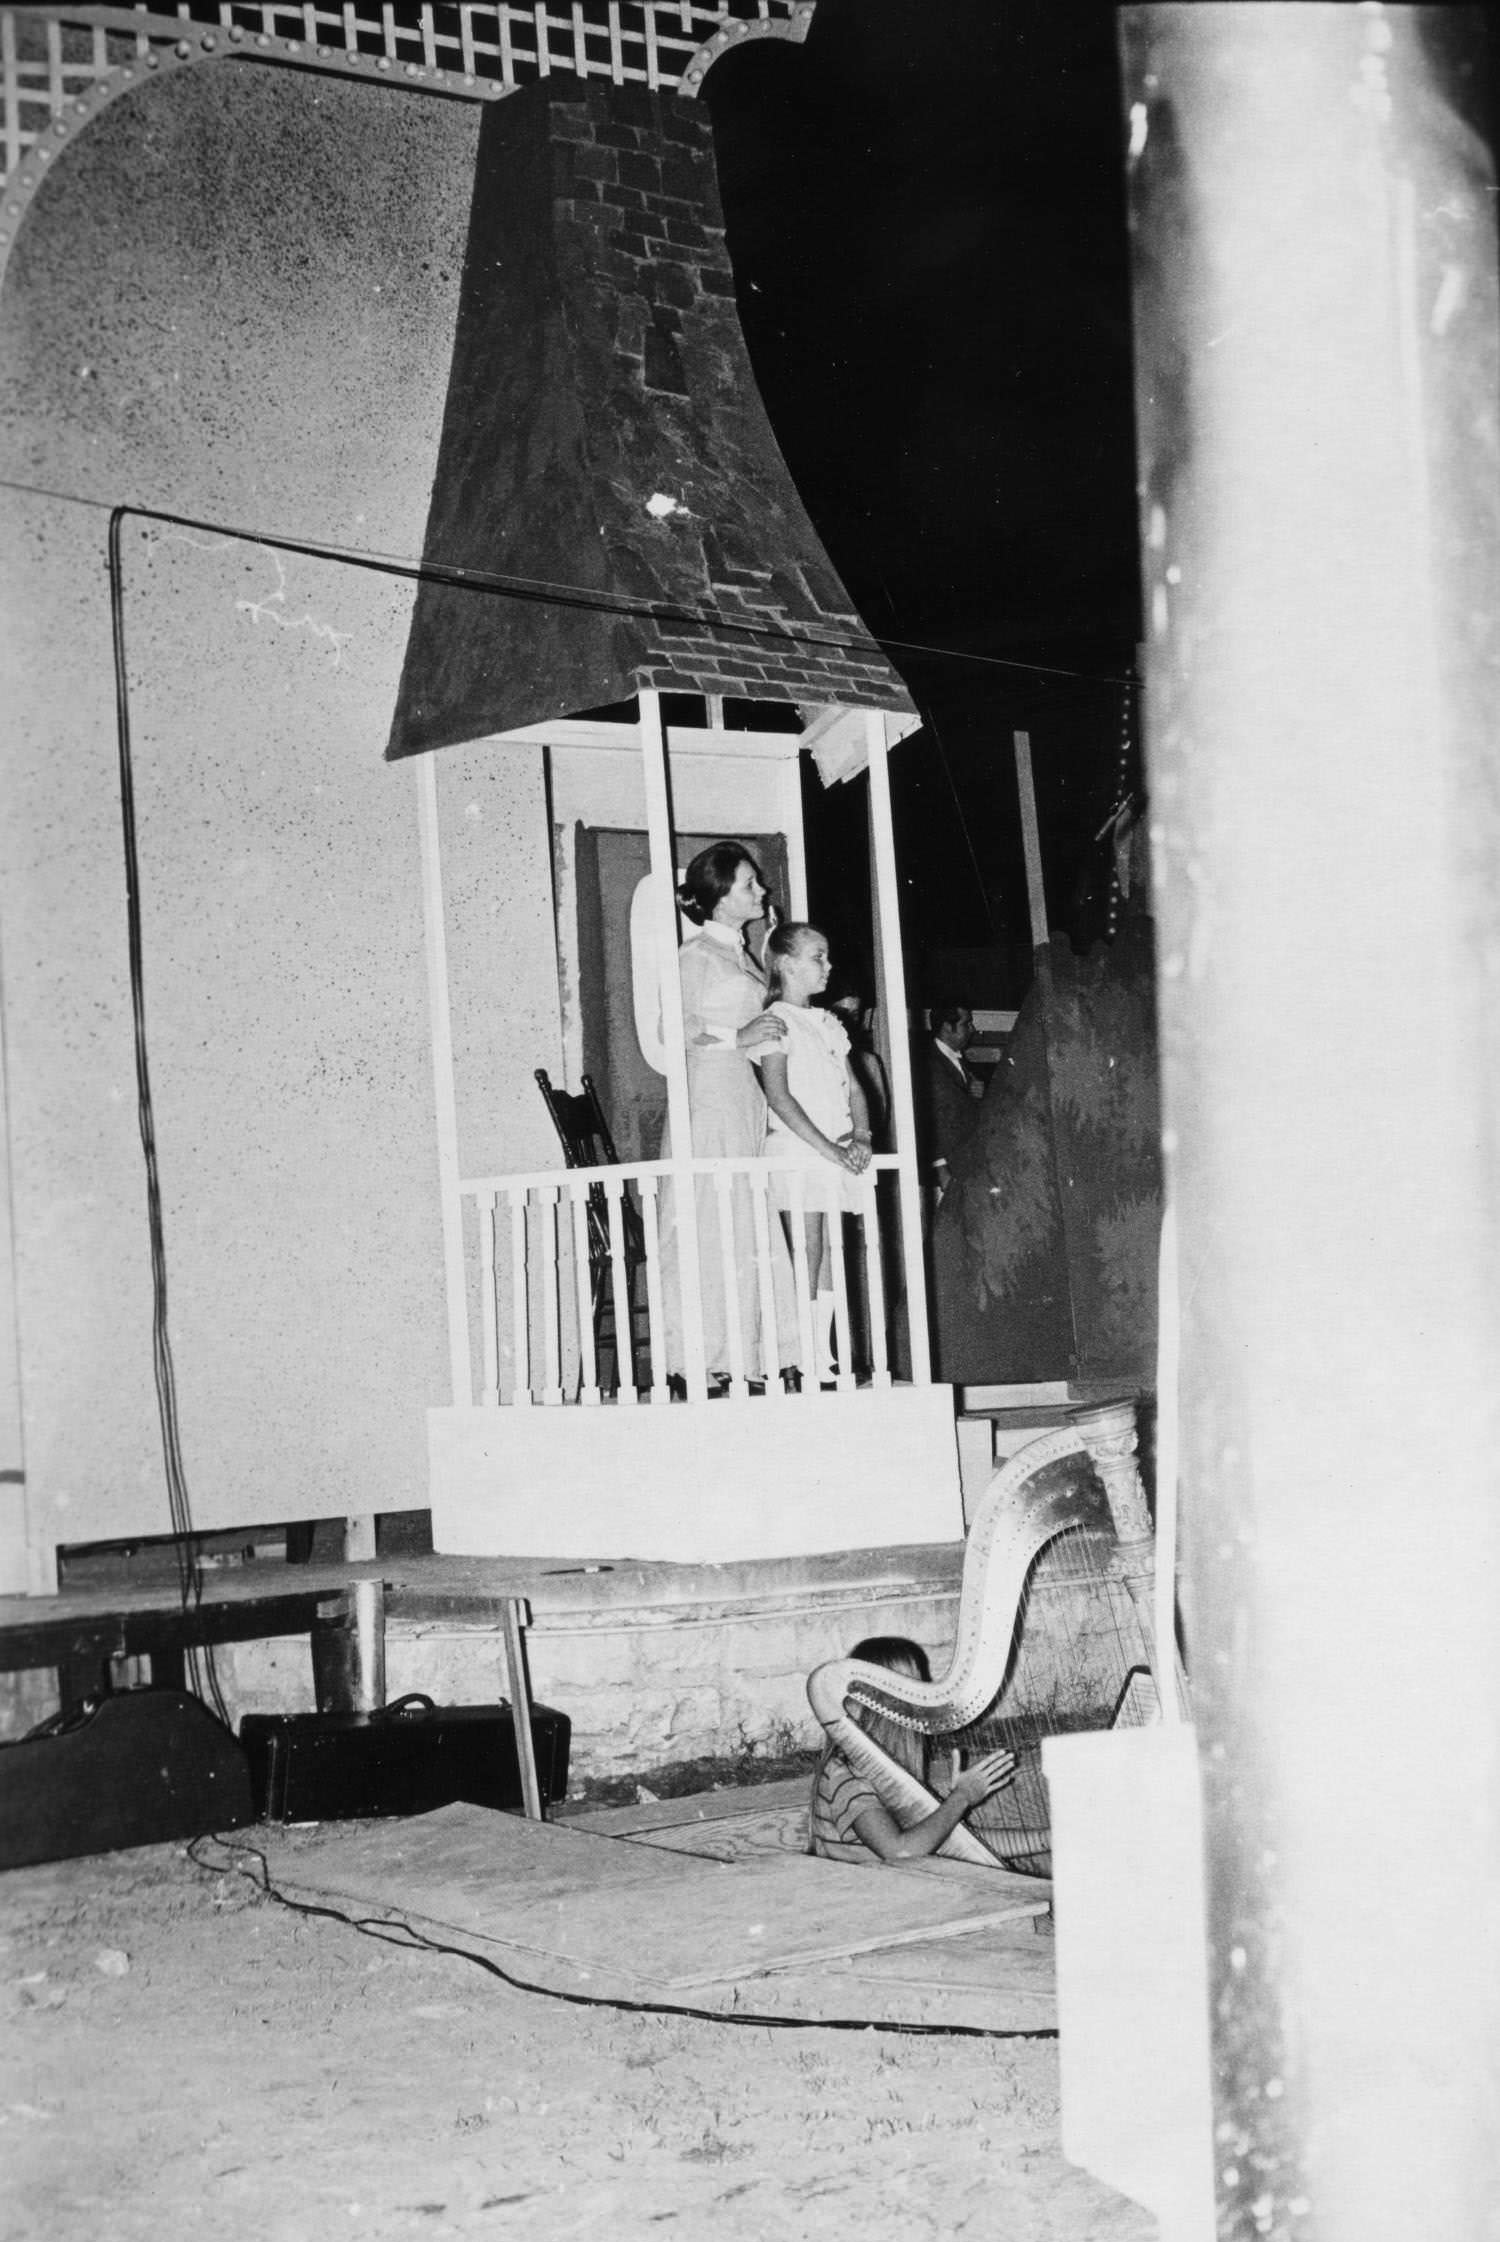 Two actresses on stage during a theatrical production of "Music Man" at Zilker Hillside Theater, 1969